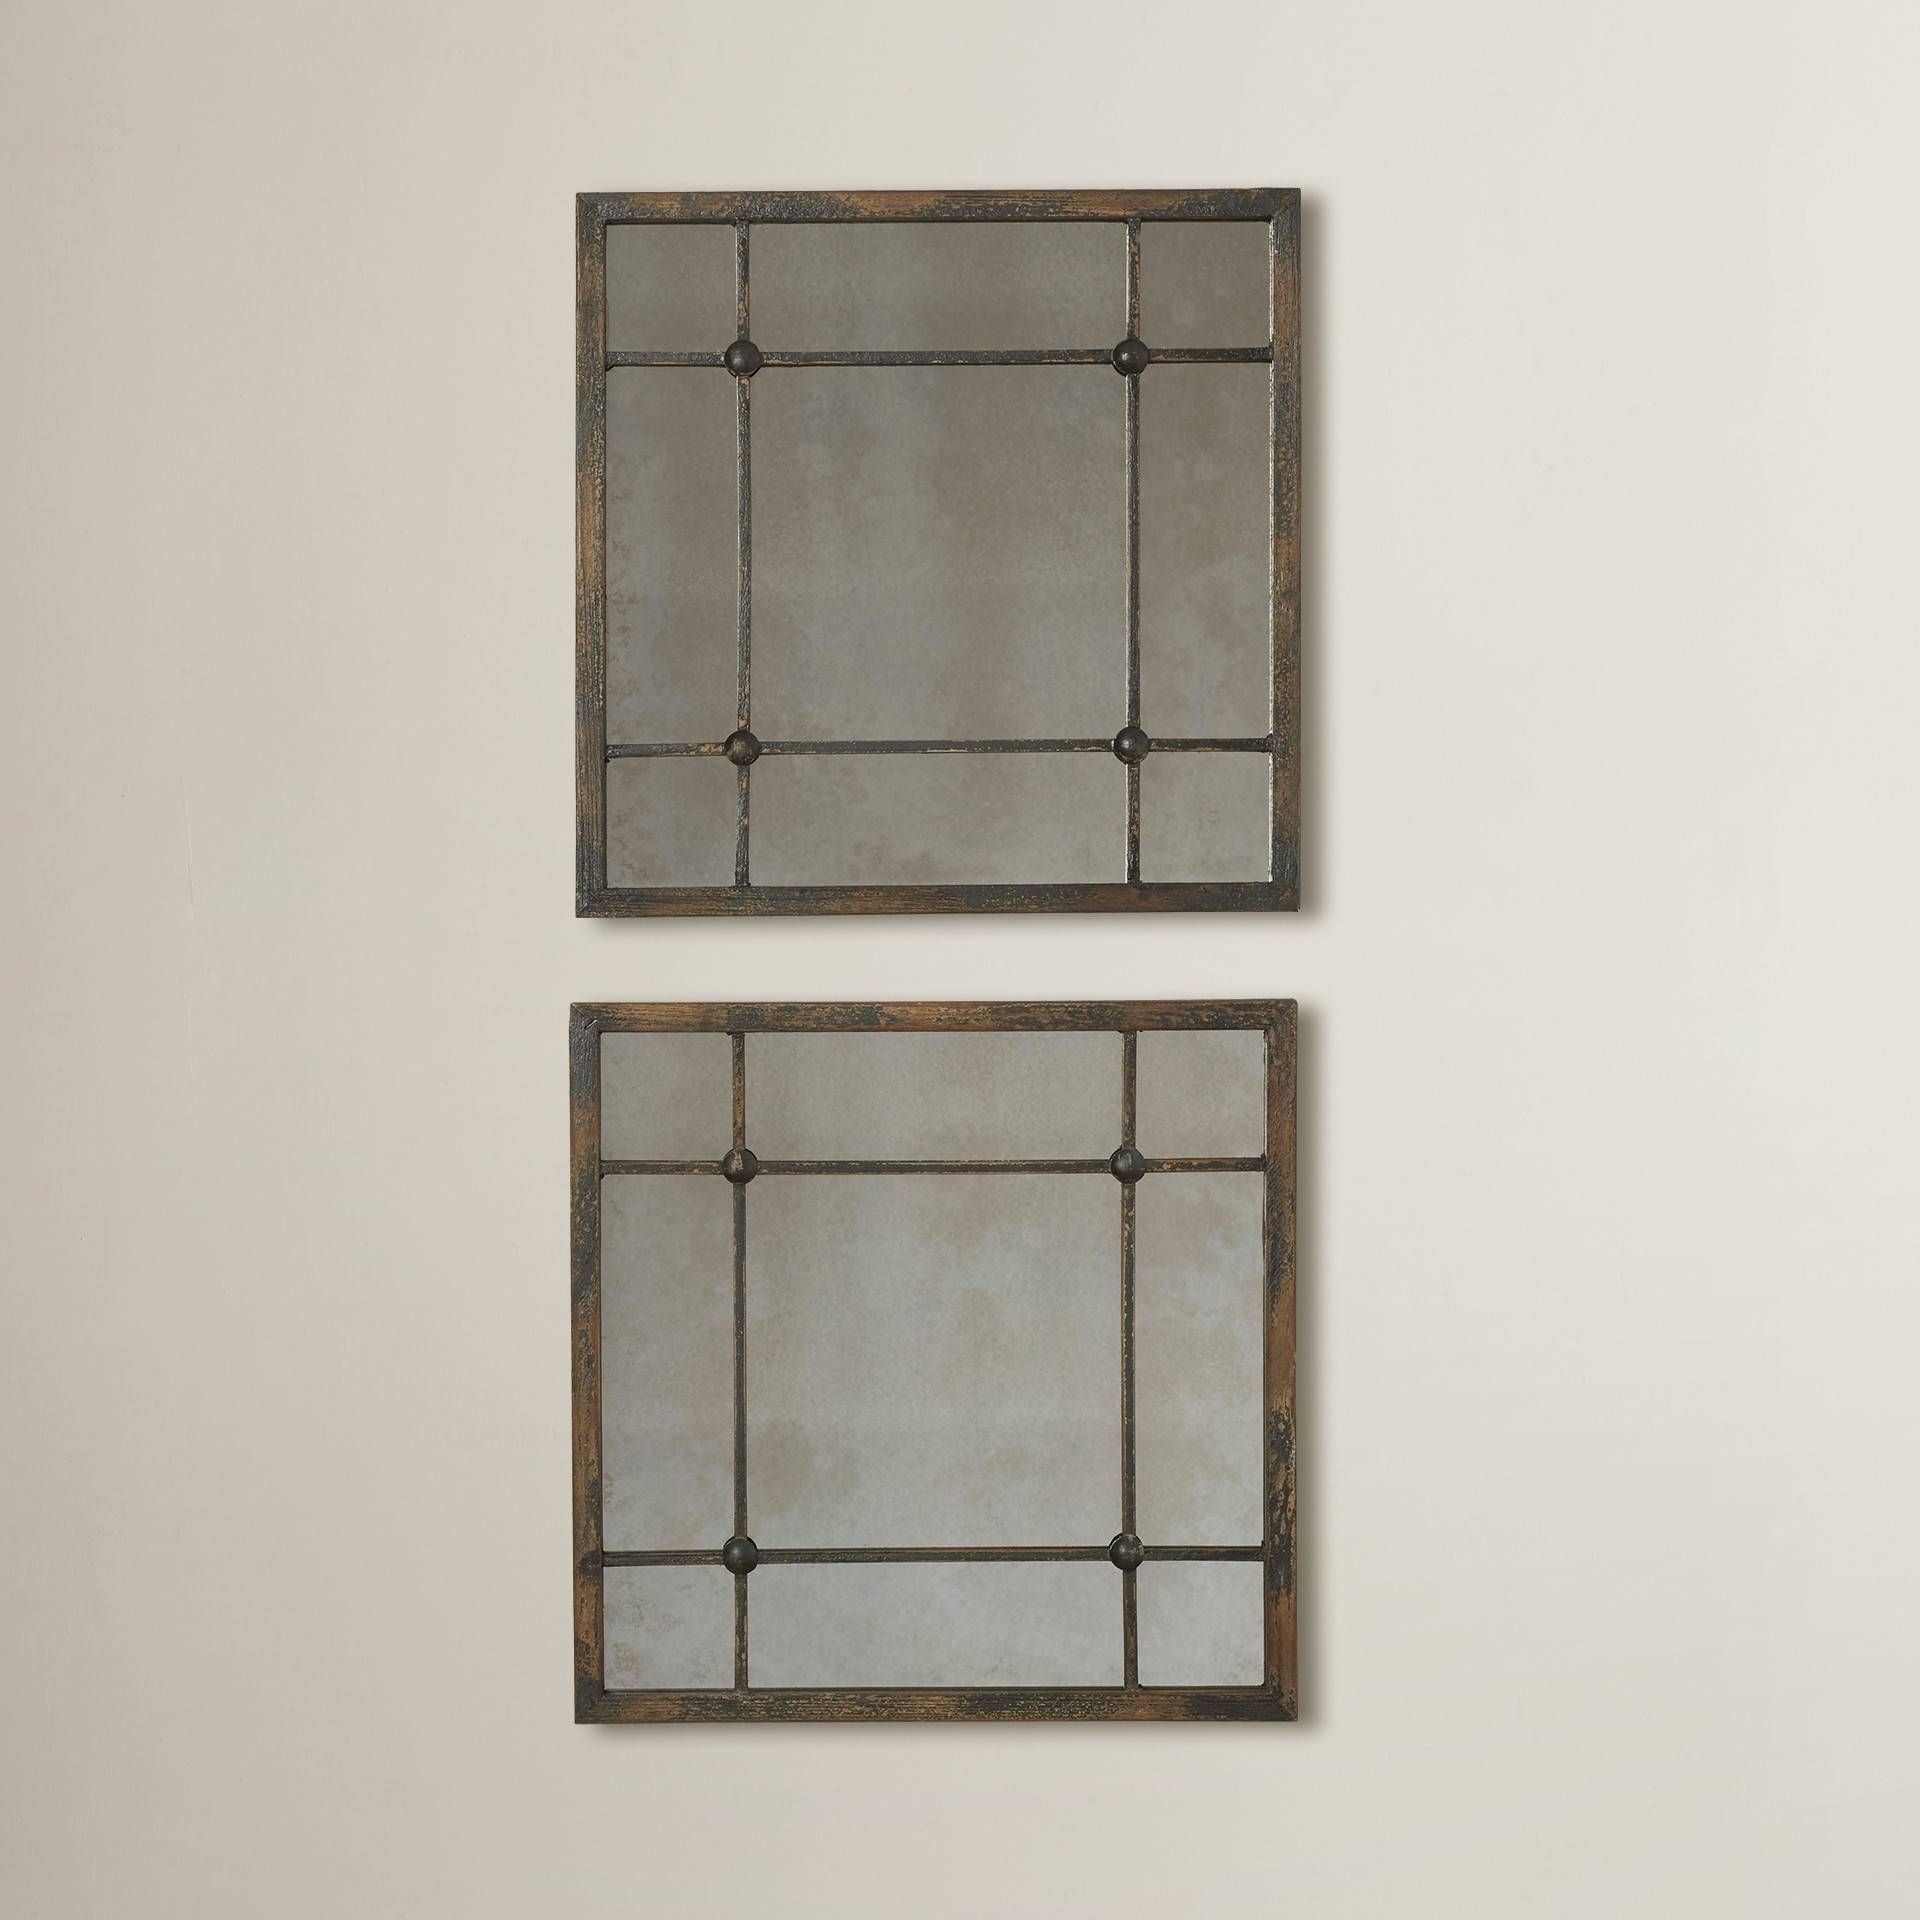 August Grove 2 Piece Square Wall Mirror Set & Reviews | Wayfair Pertaining To Square Wall Mirrors (View 1 of 25)